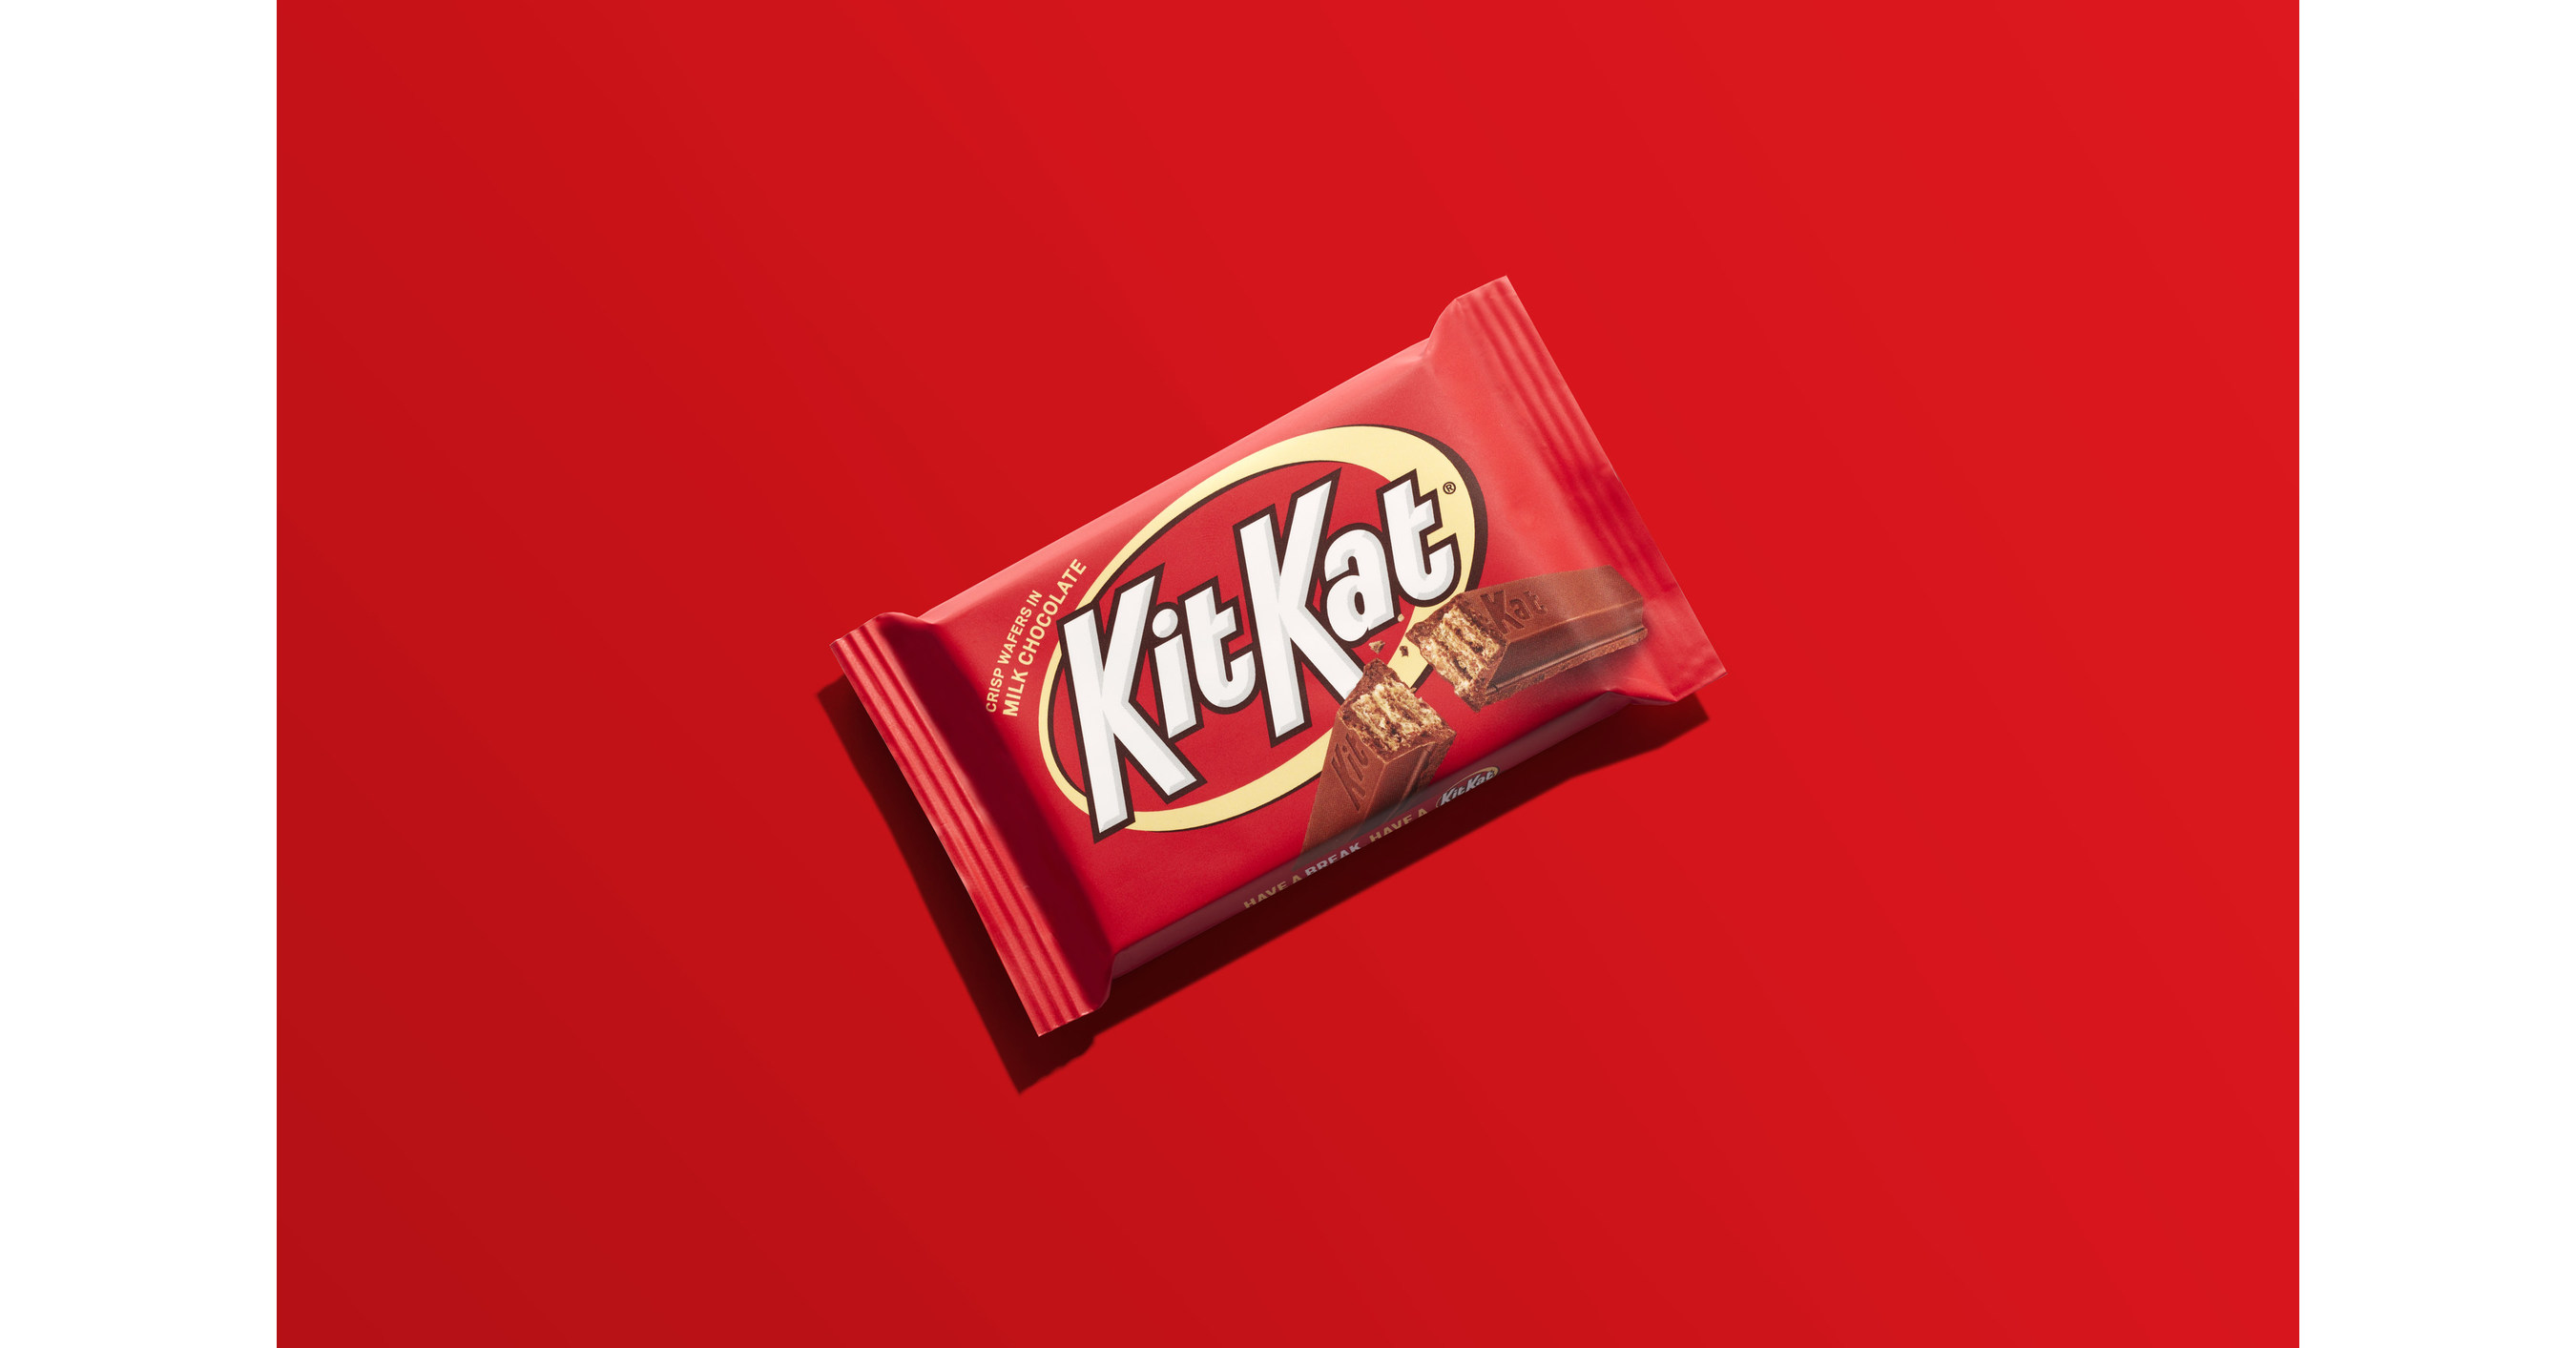 Pictures of kit kat